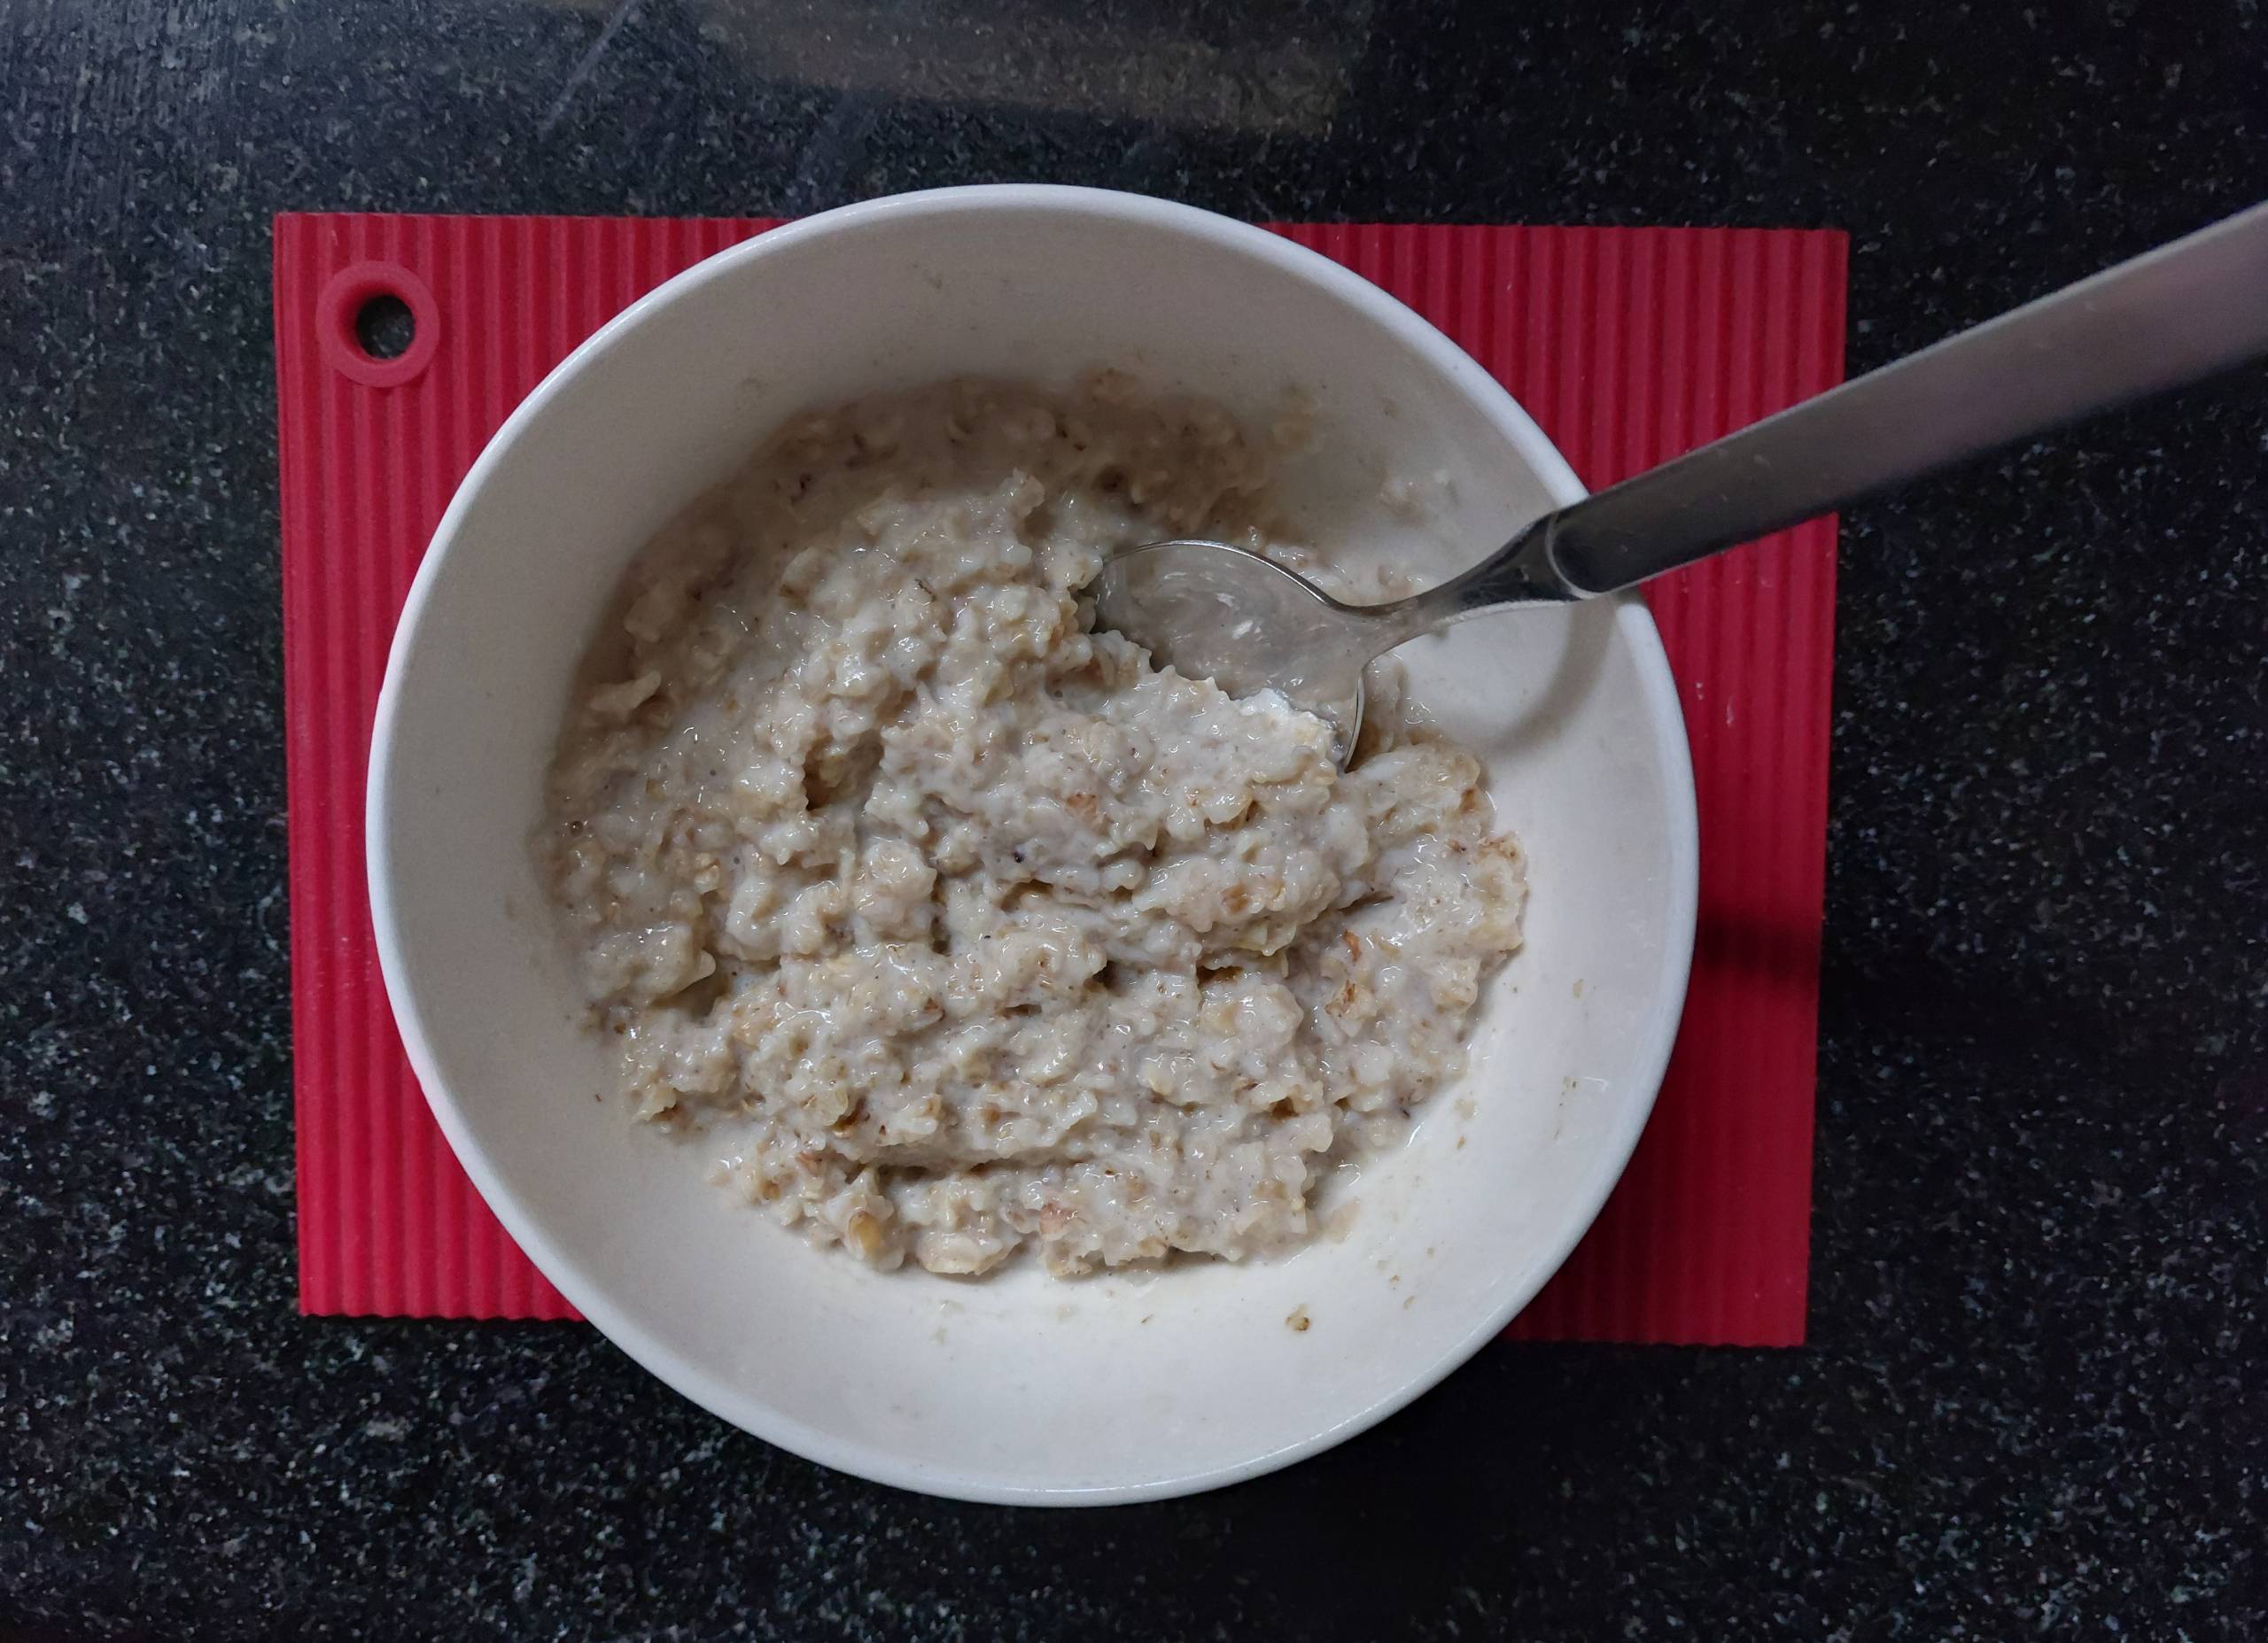 A perfect porridge, what should be a perfect ratio of milk and flakes